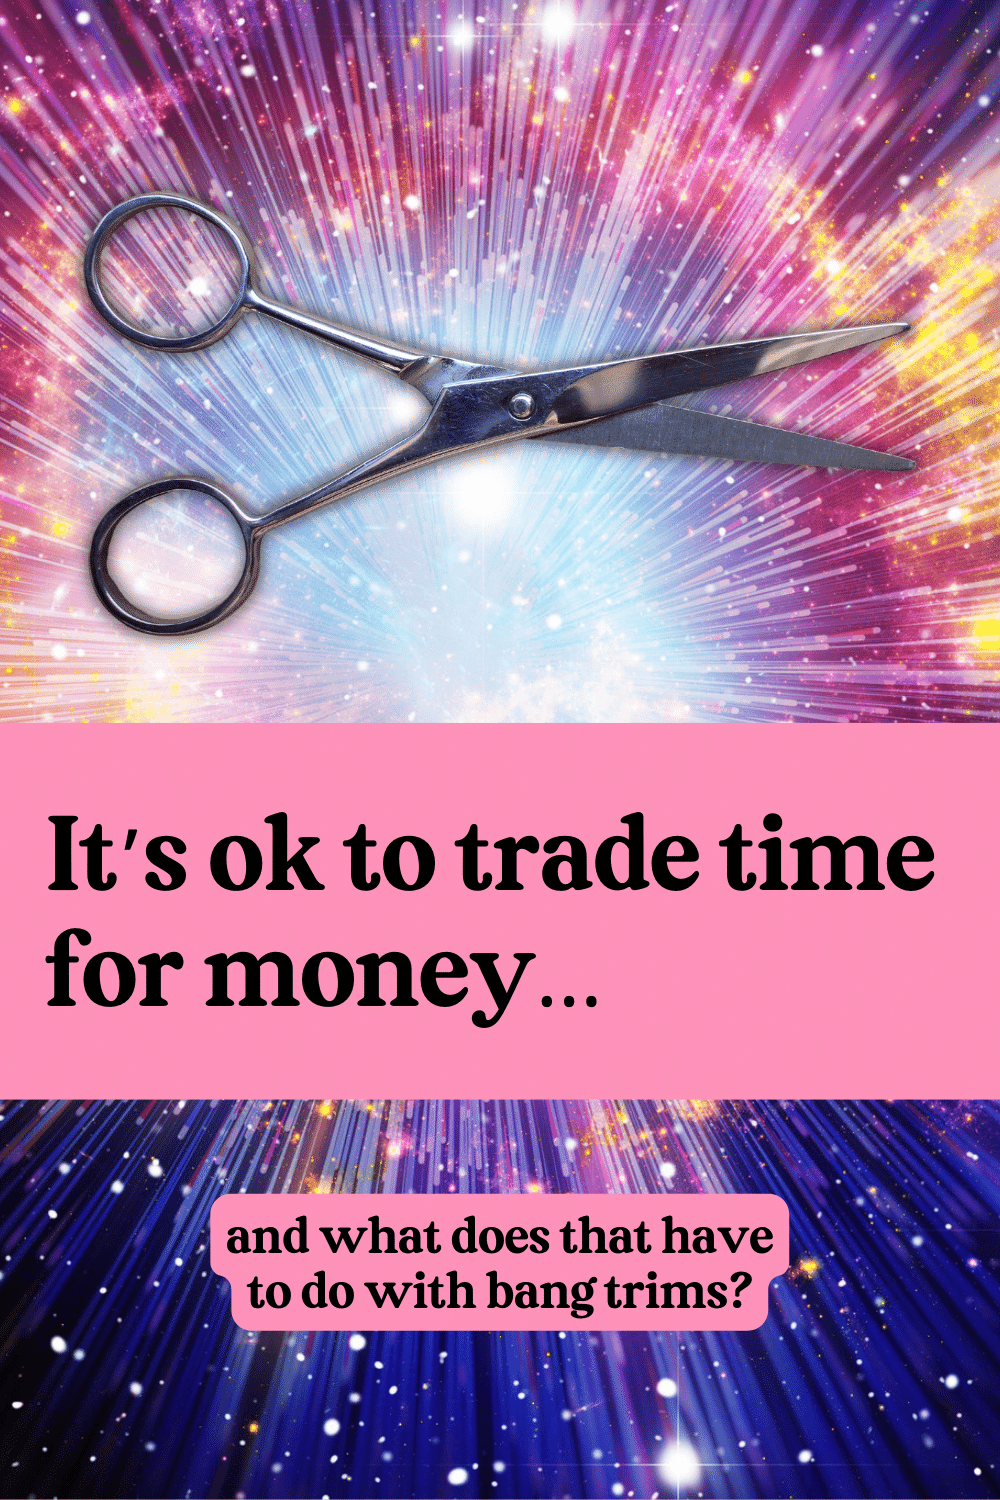 image of outerspace and hair cutting scissors and the words, "It's ok to trade time for money...and what that has to do with bang trims." Blog Post